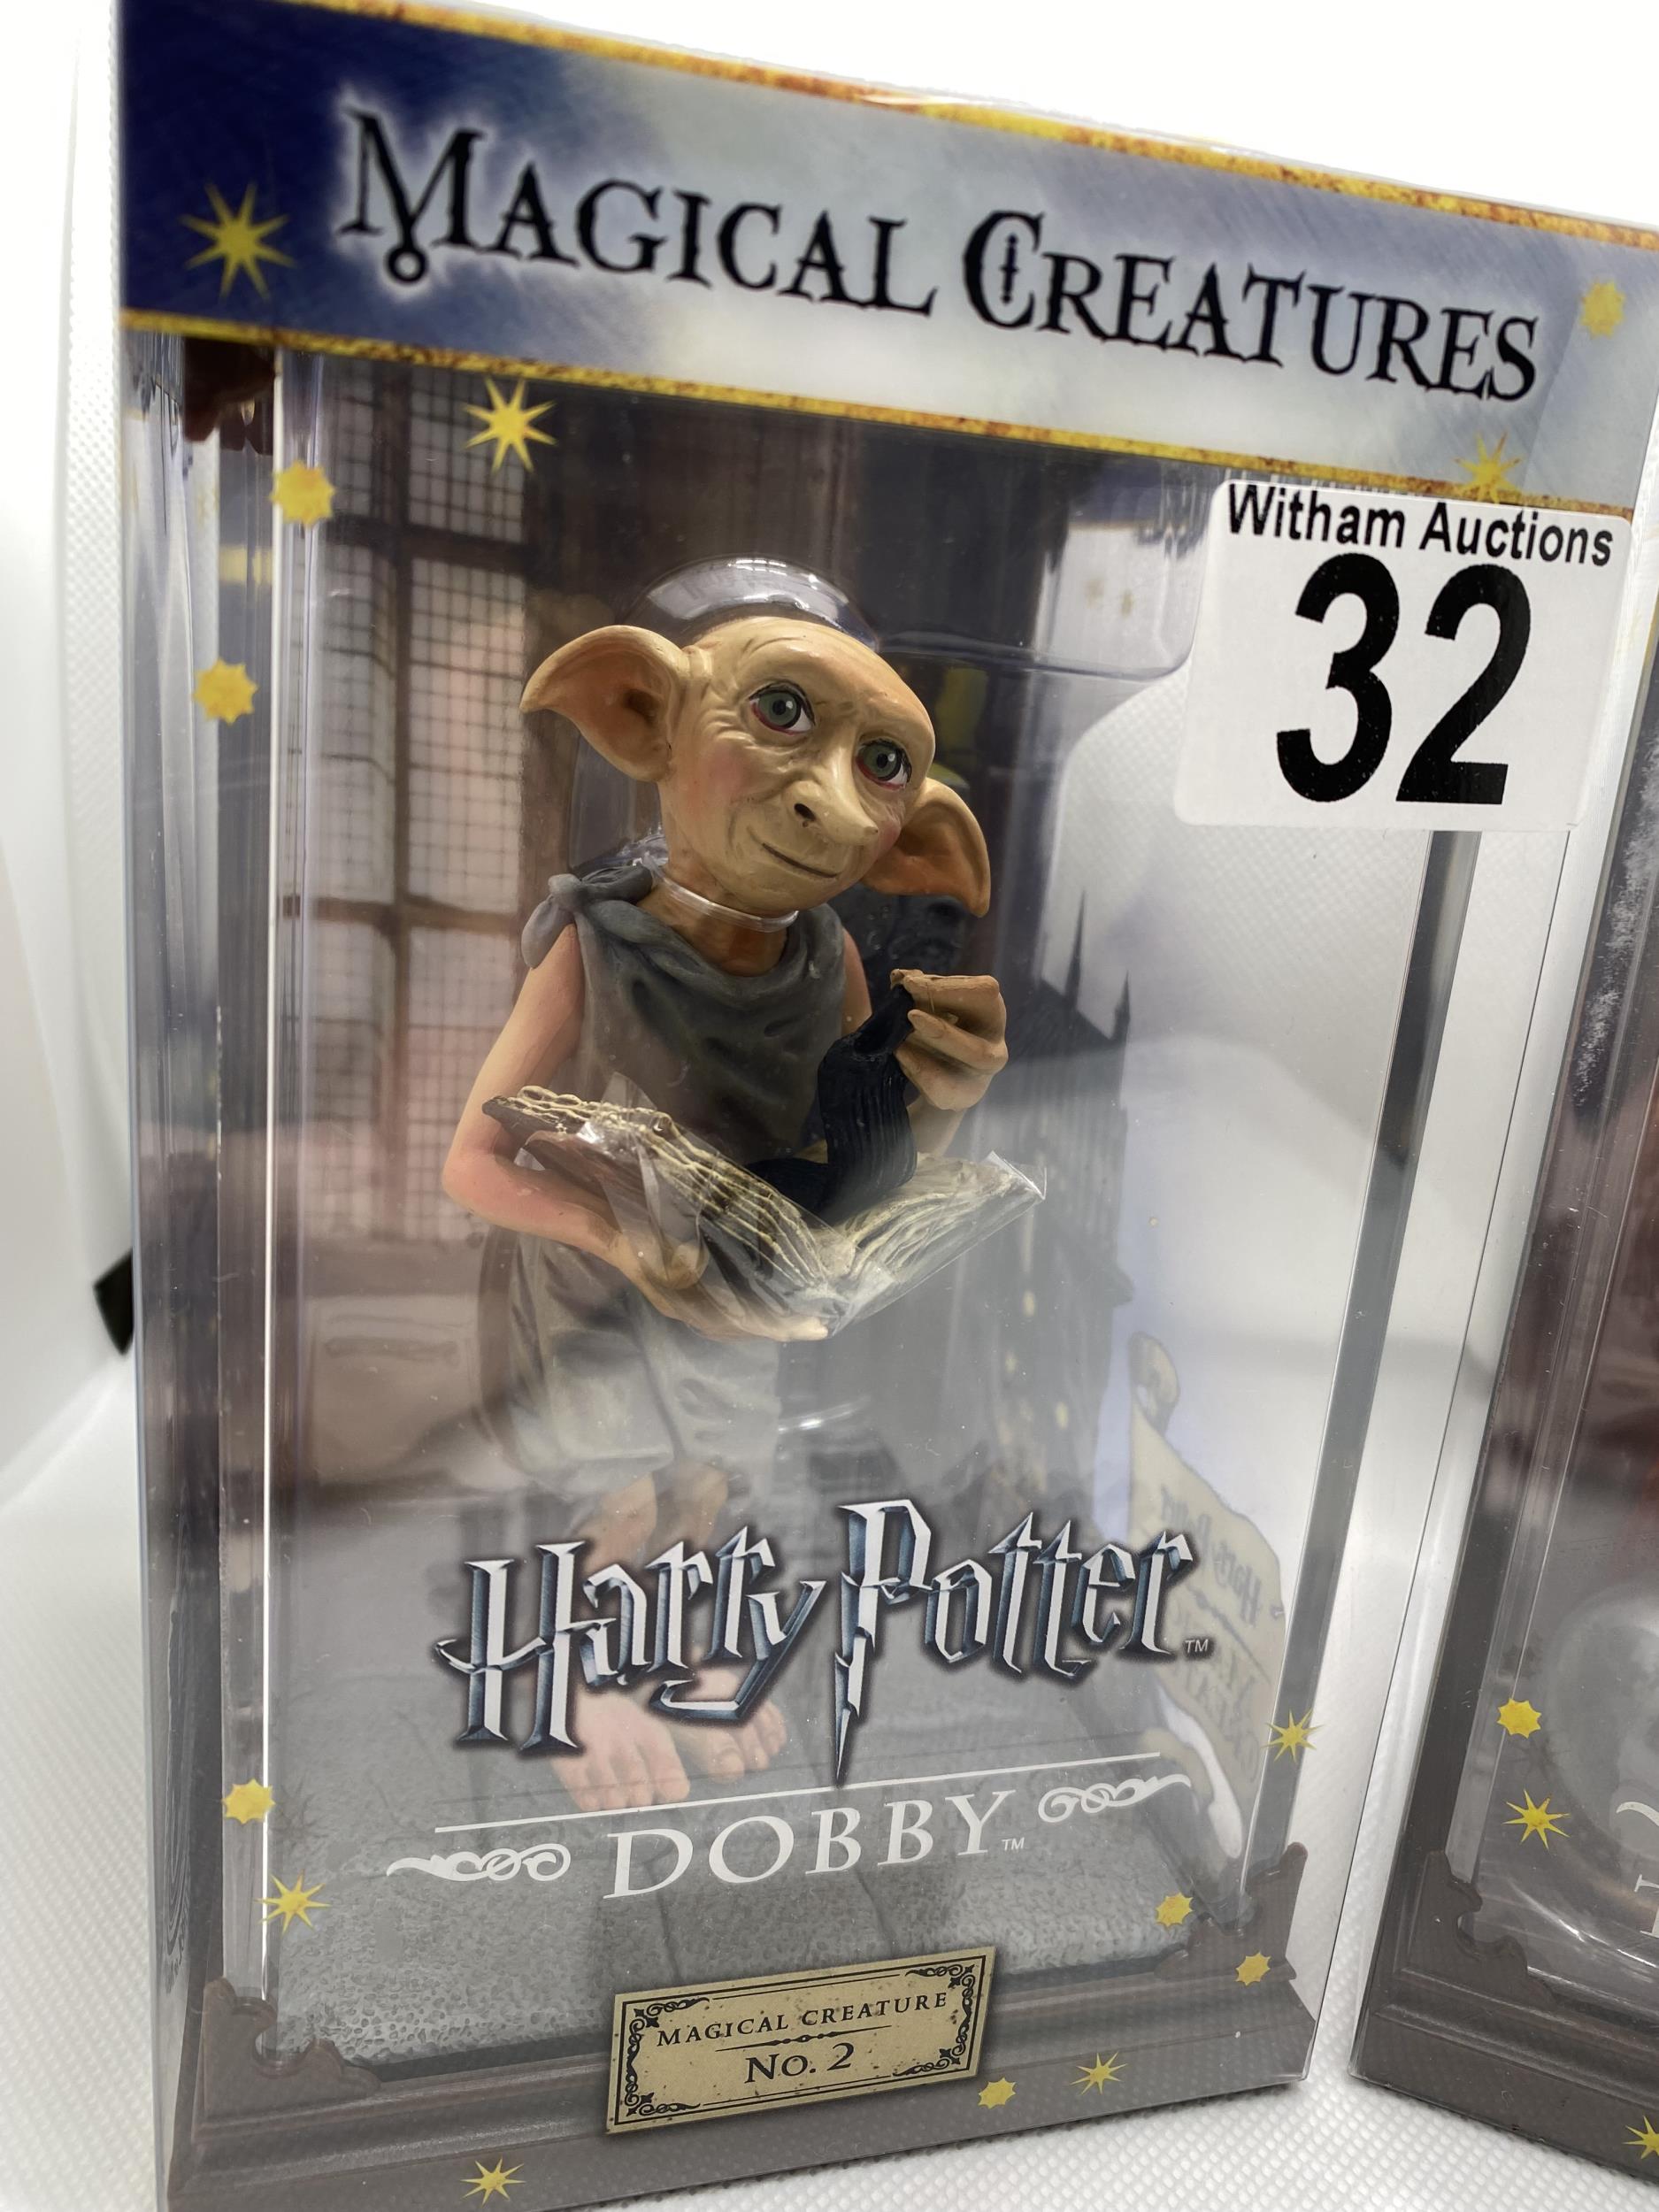 Two boxed Warner Brothers Harry Potter Magical Creatures figures no.2 ‘Dobby’ and no.8 'Fawkes the - Image 3 of 5